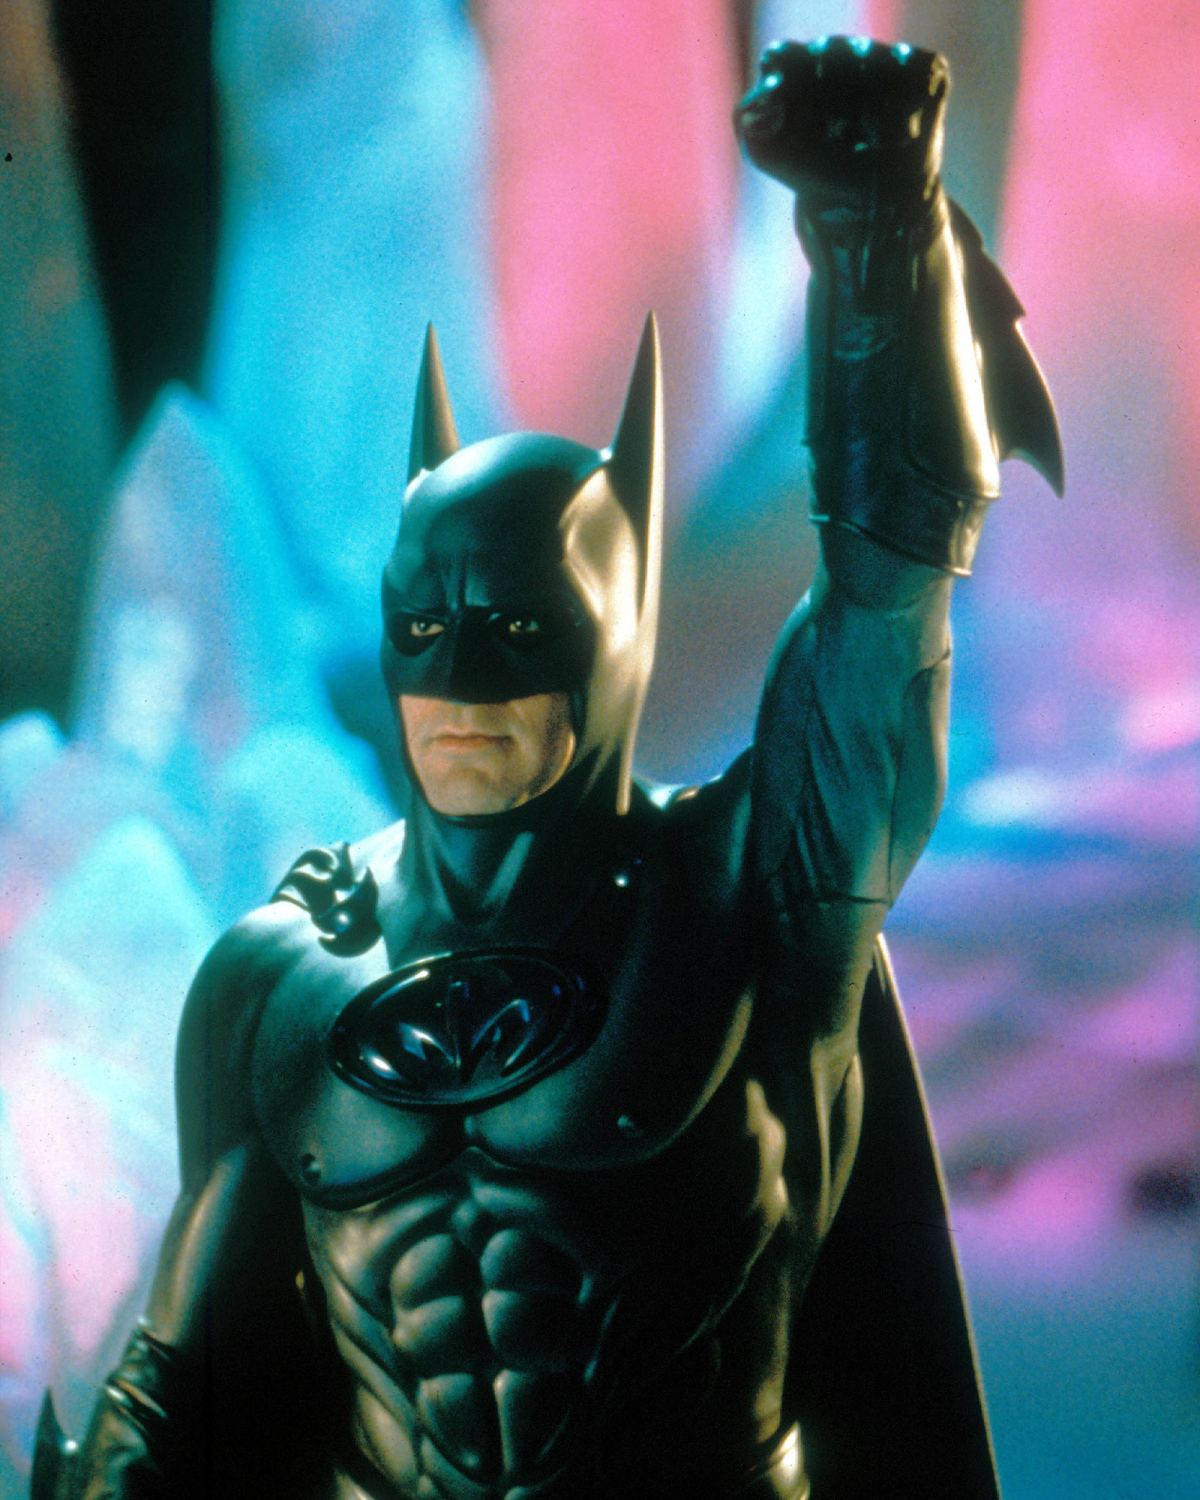 How to Watch All of the 'Batman' Movies in Order